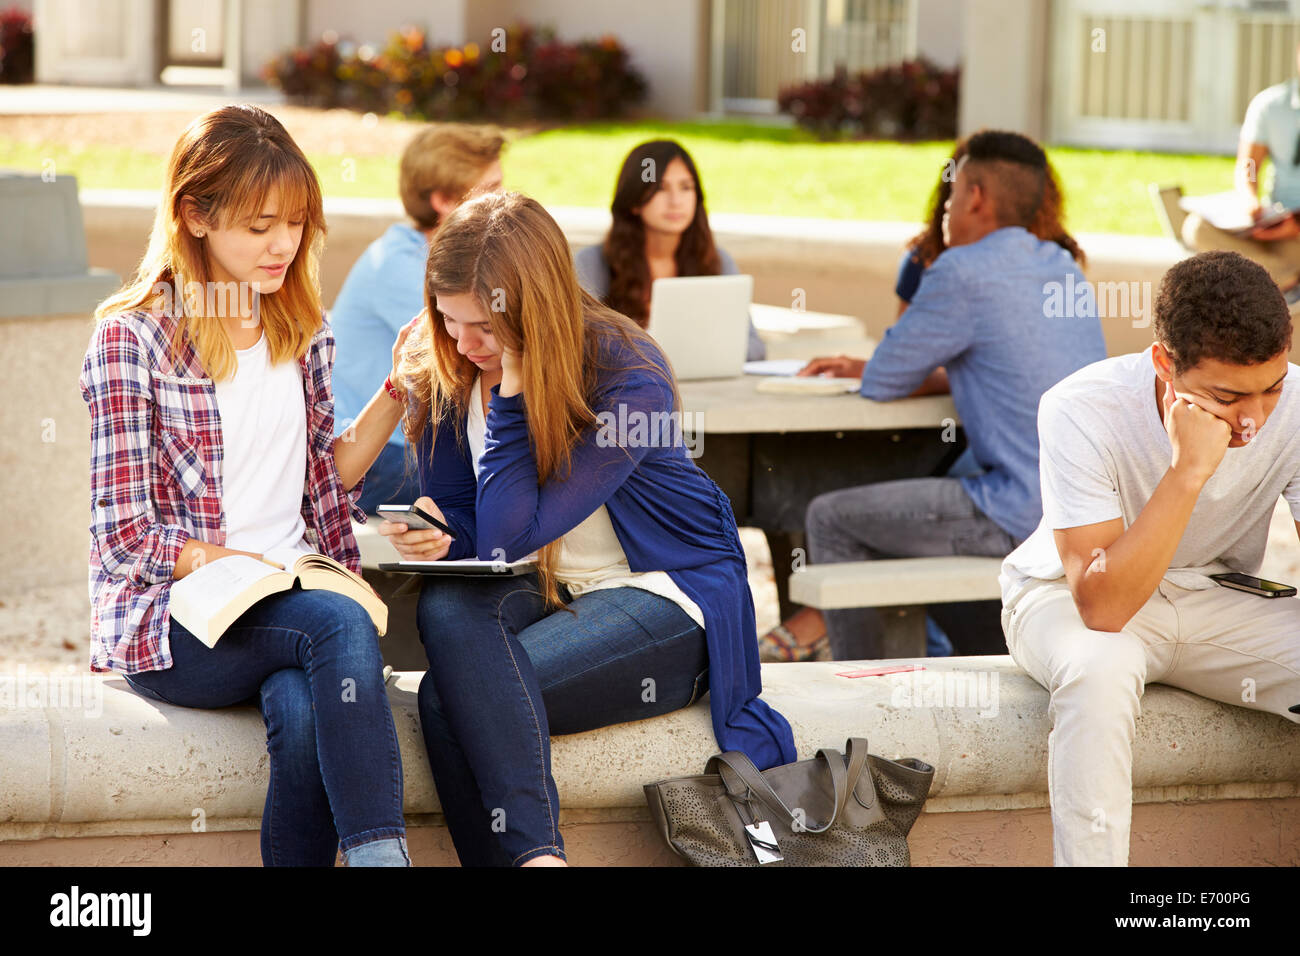 Female High School Student Comforting Unhappy Friend Stock Photo